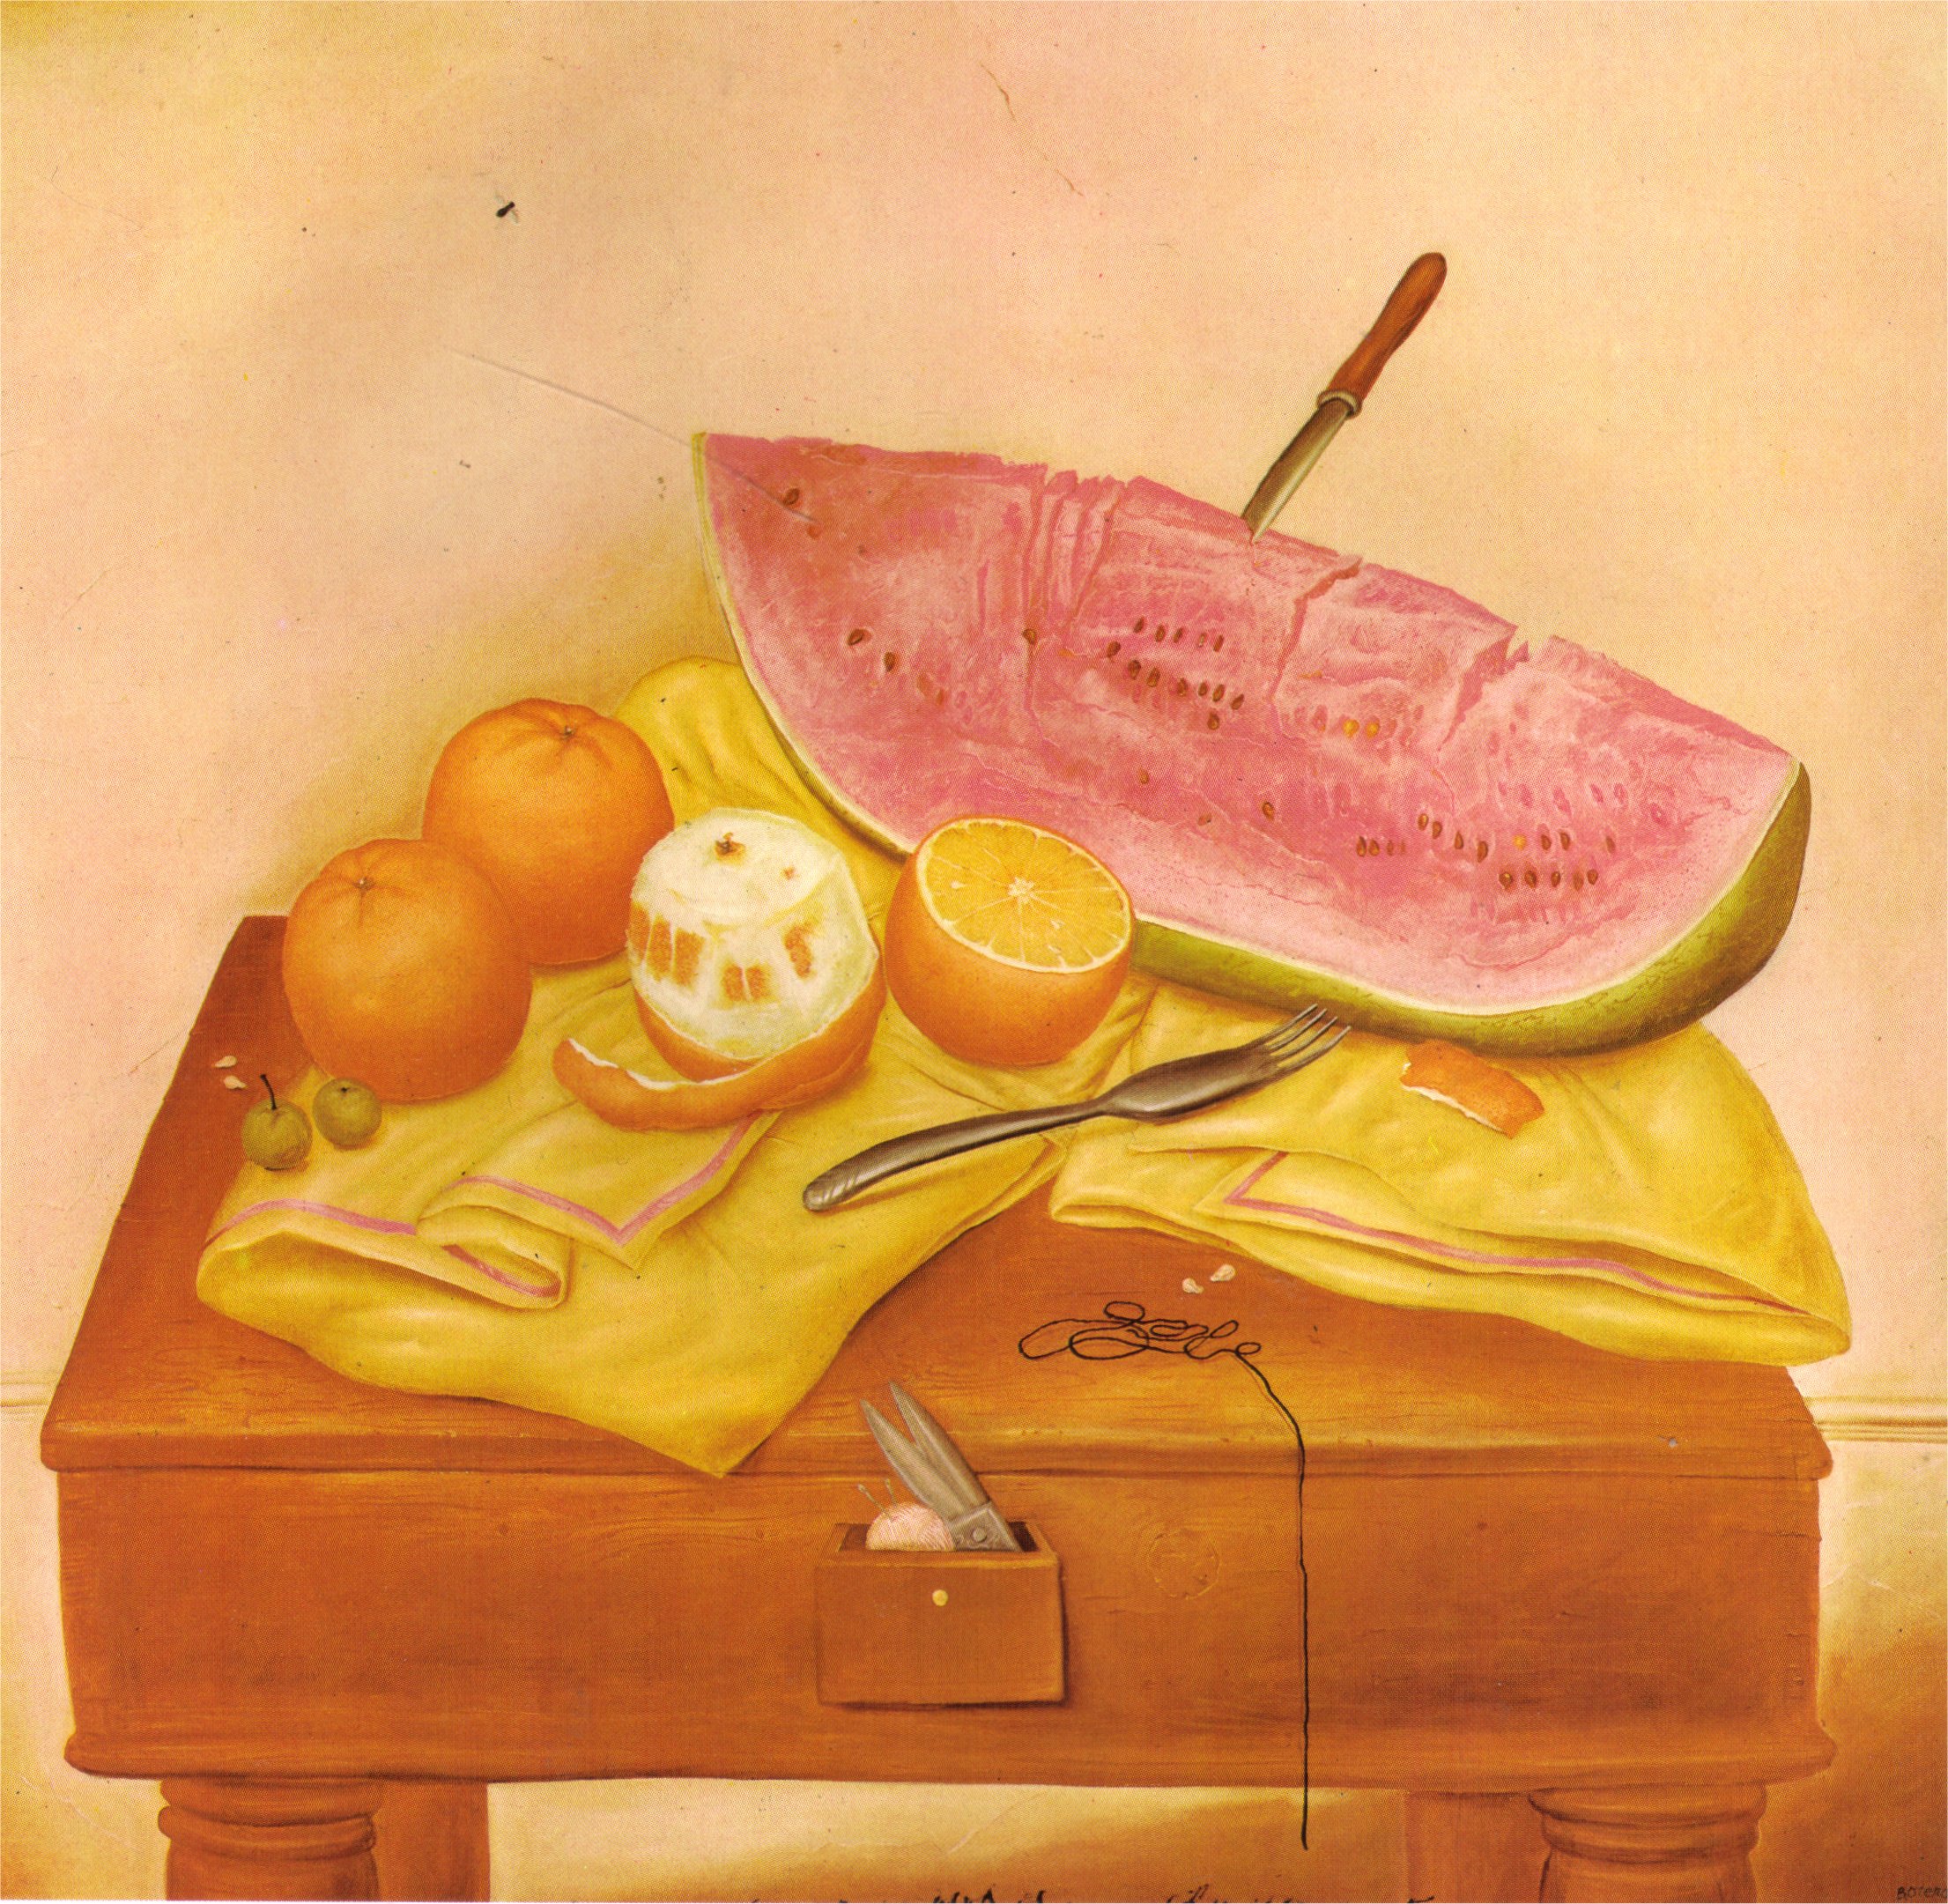 Watermelons and Oranges (1970).